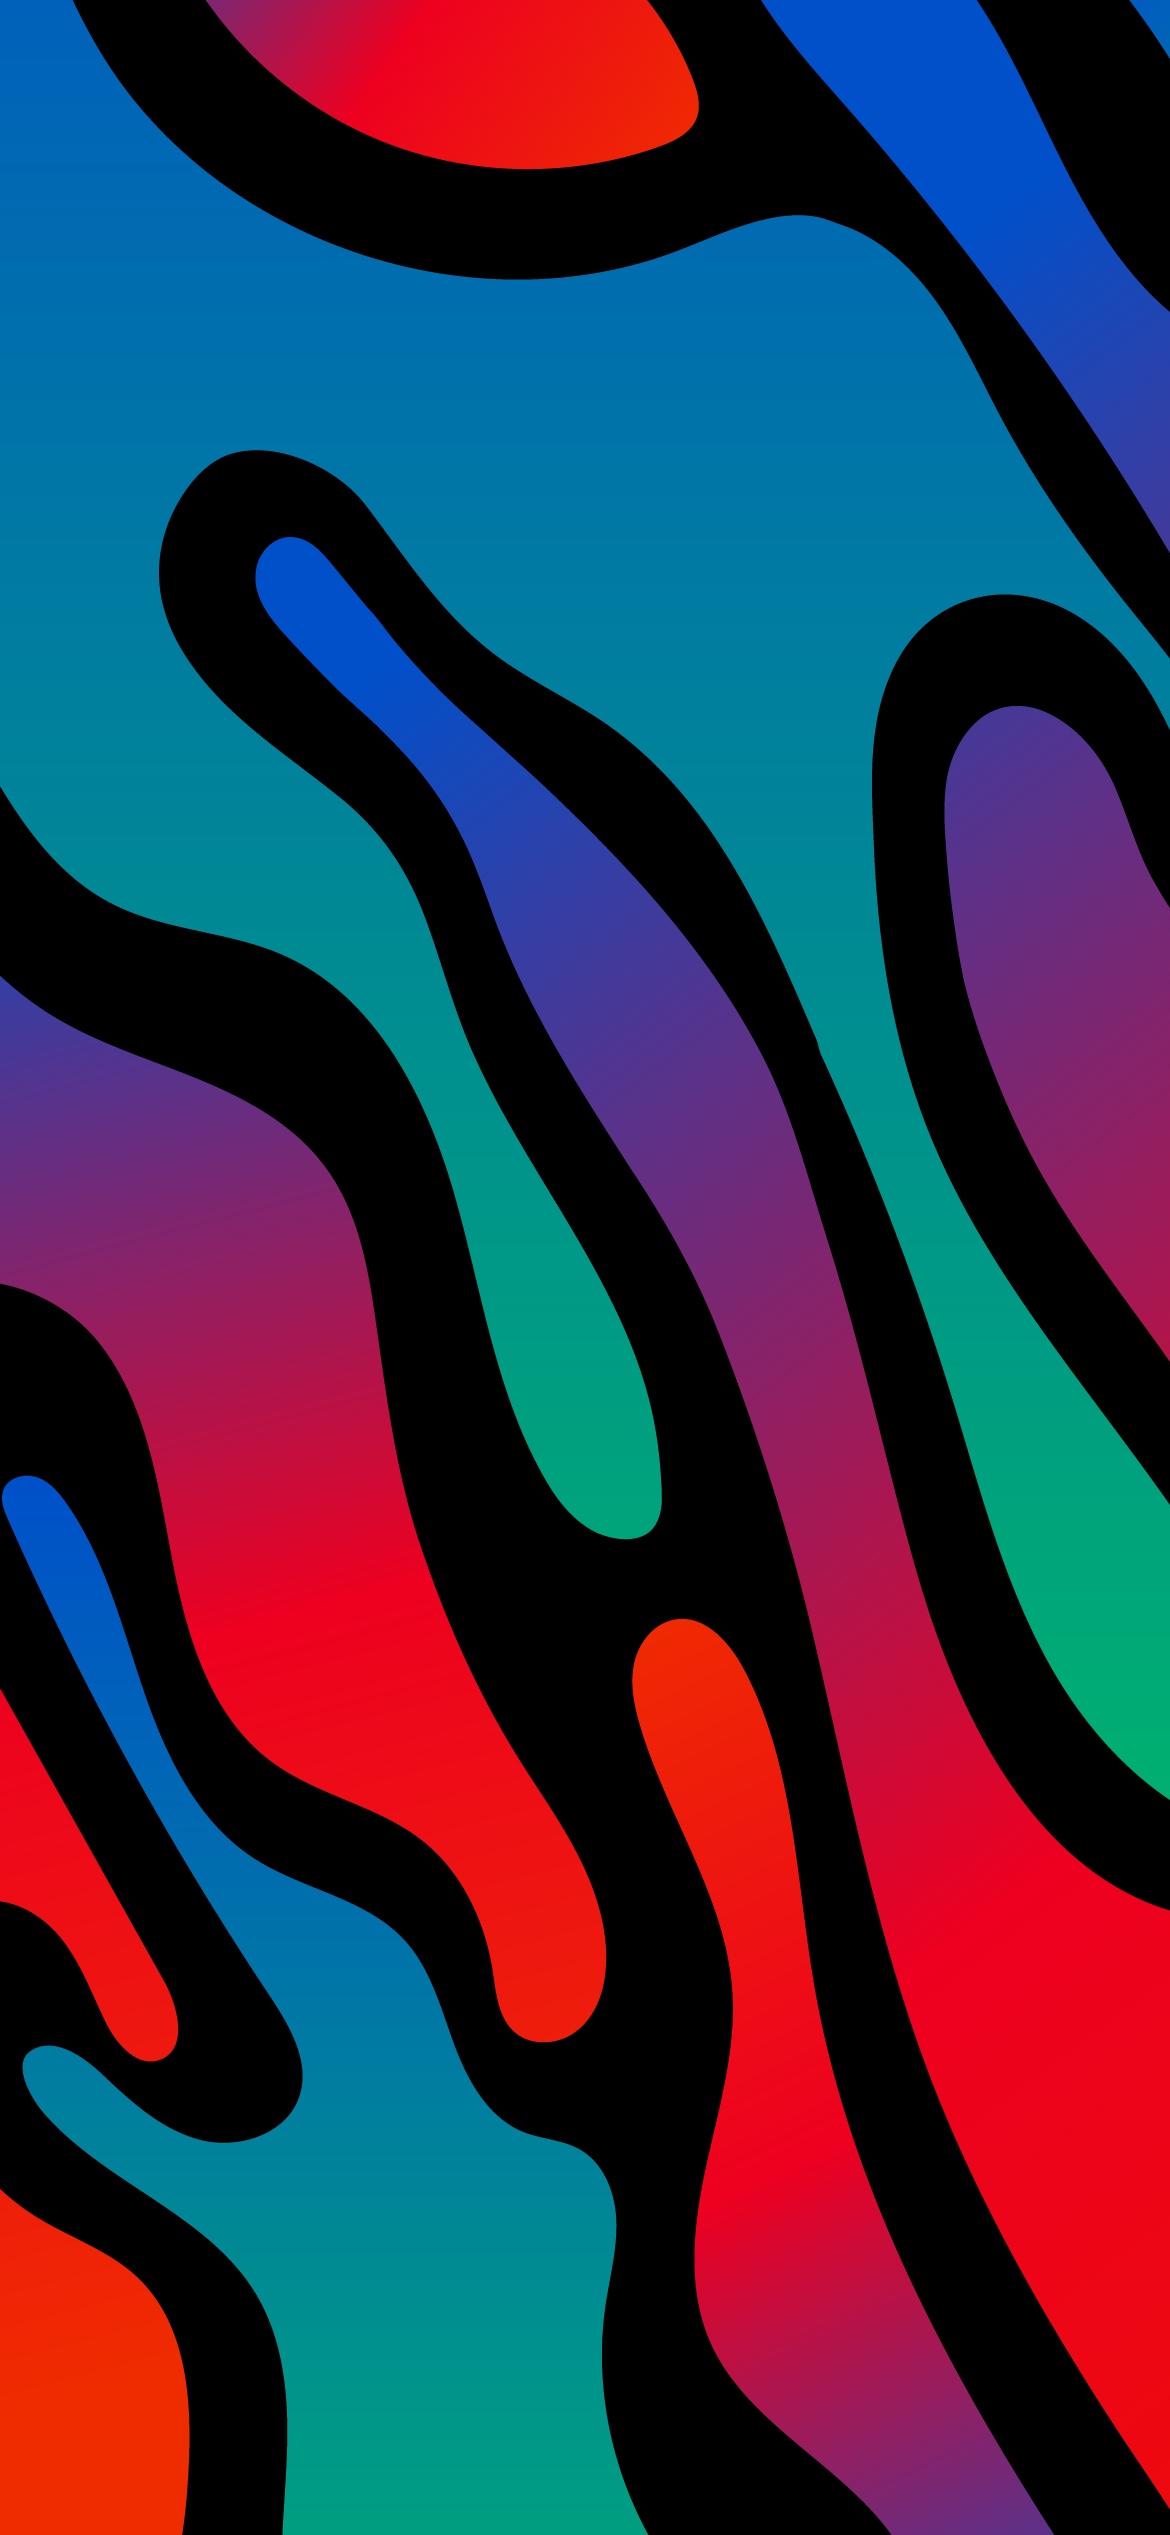 Colorful iPhone Wallpapers on WallpaperDog